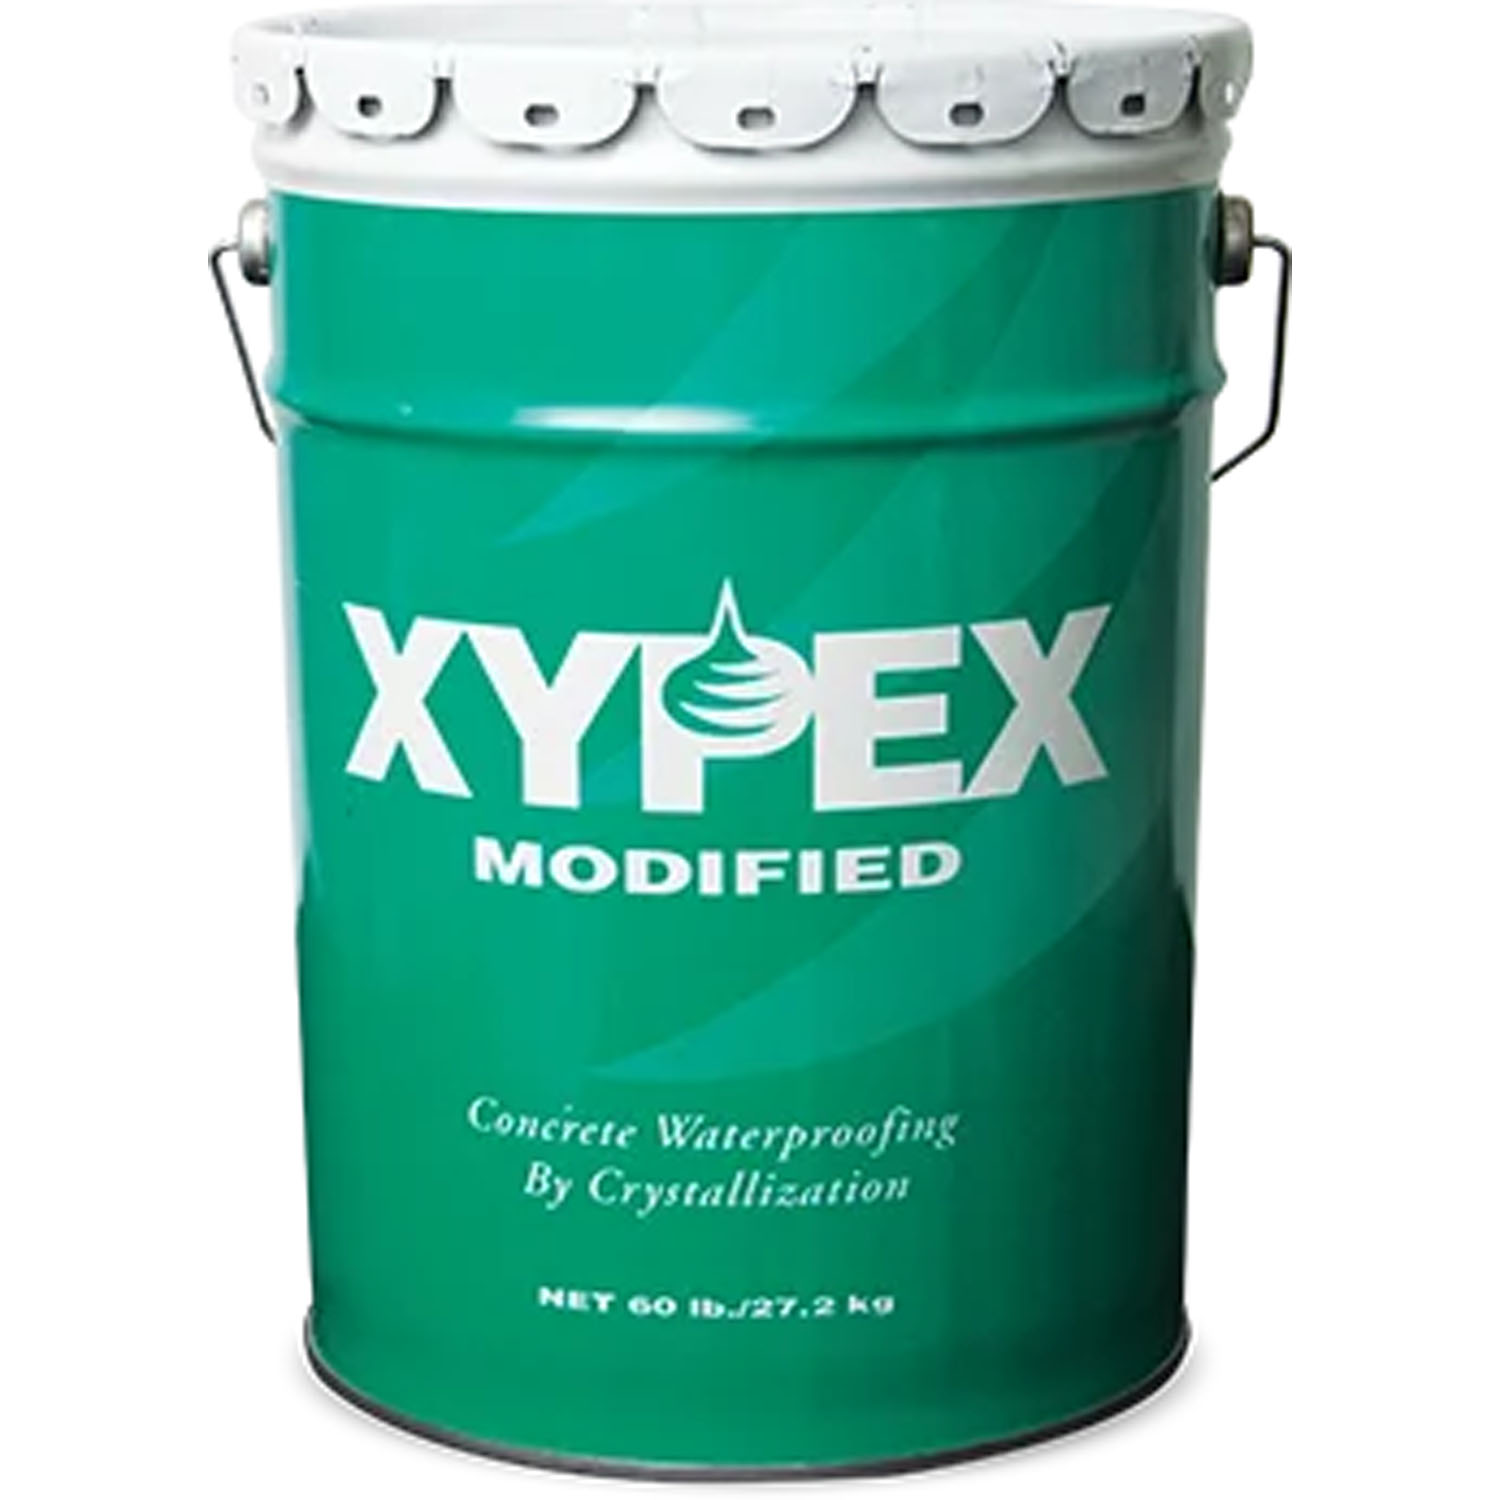 60 LB. XYPEX MODIFIED CONCRETE WATERPROOFING